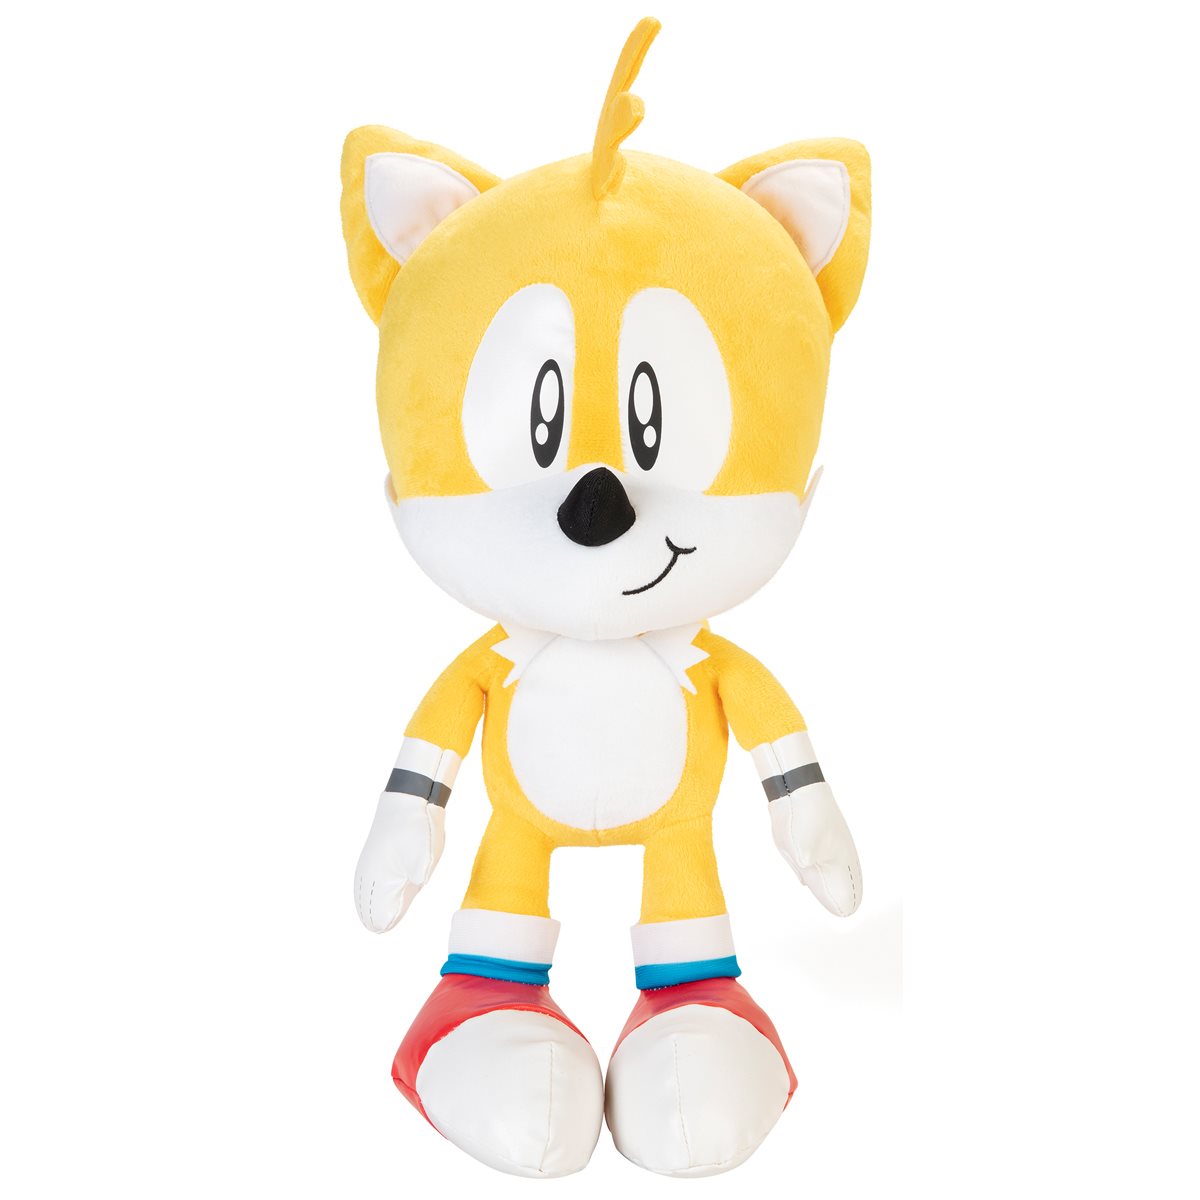 sonic and tails plush